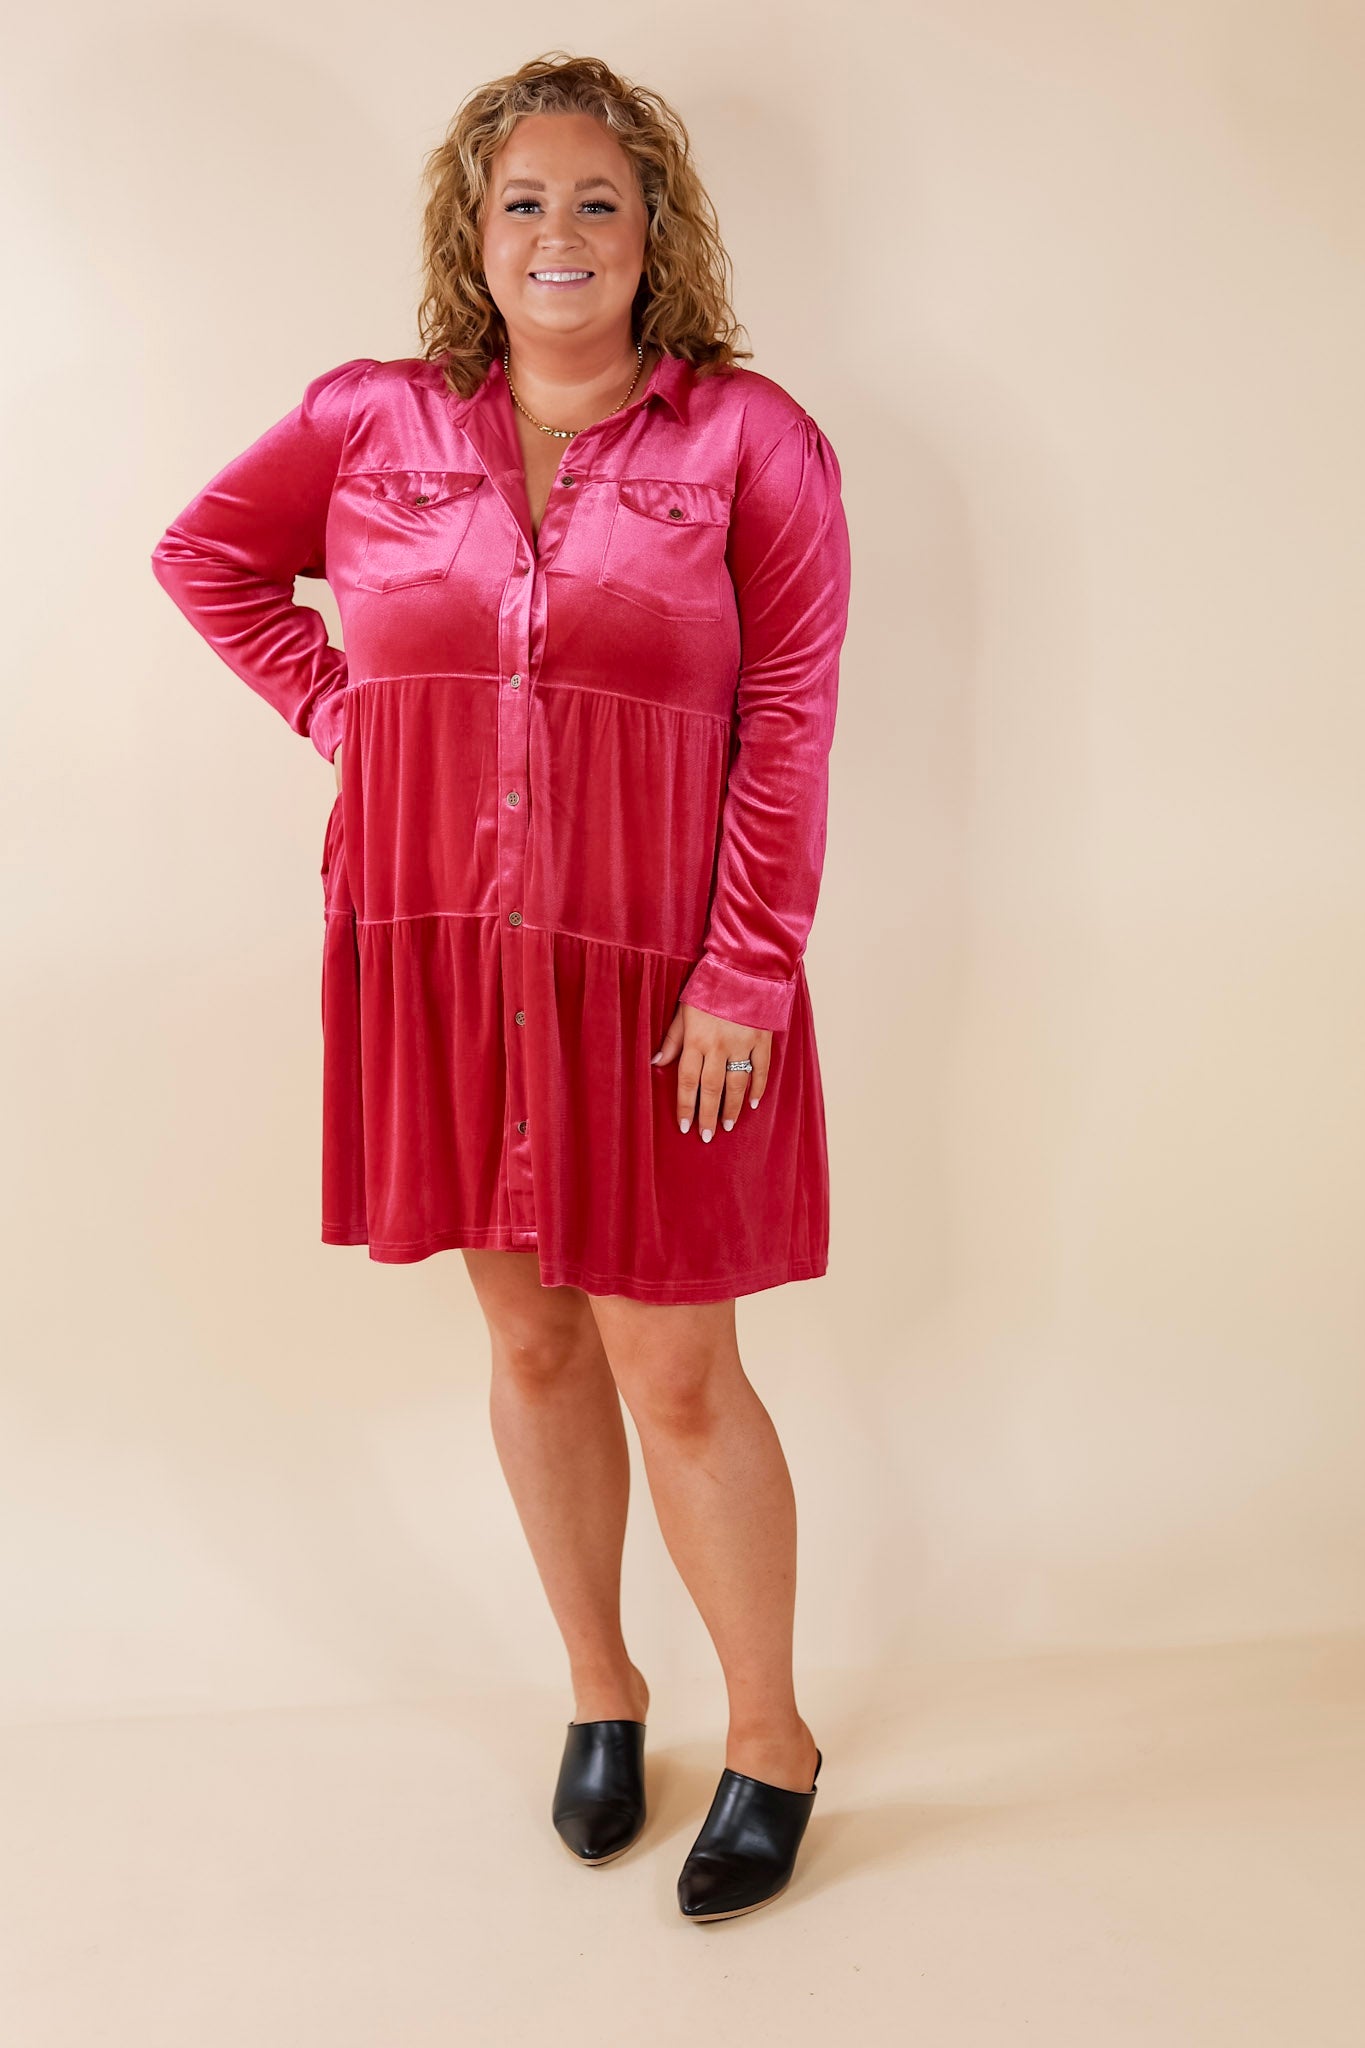 Grateful Gathering Velvet Button Up Dress with Long Sleeves in Raspberry Pink - Giddy Up Glamour Boutique